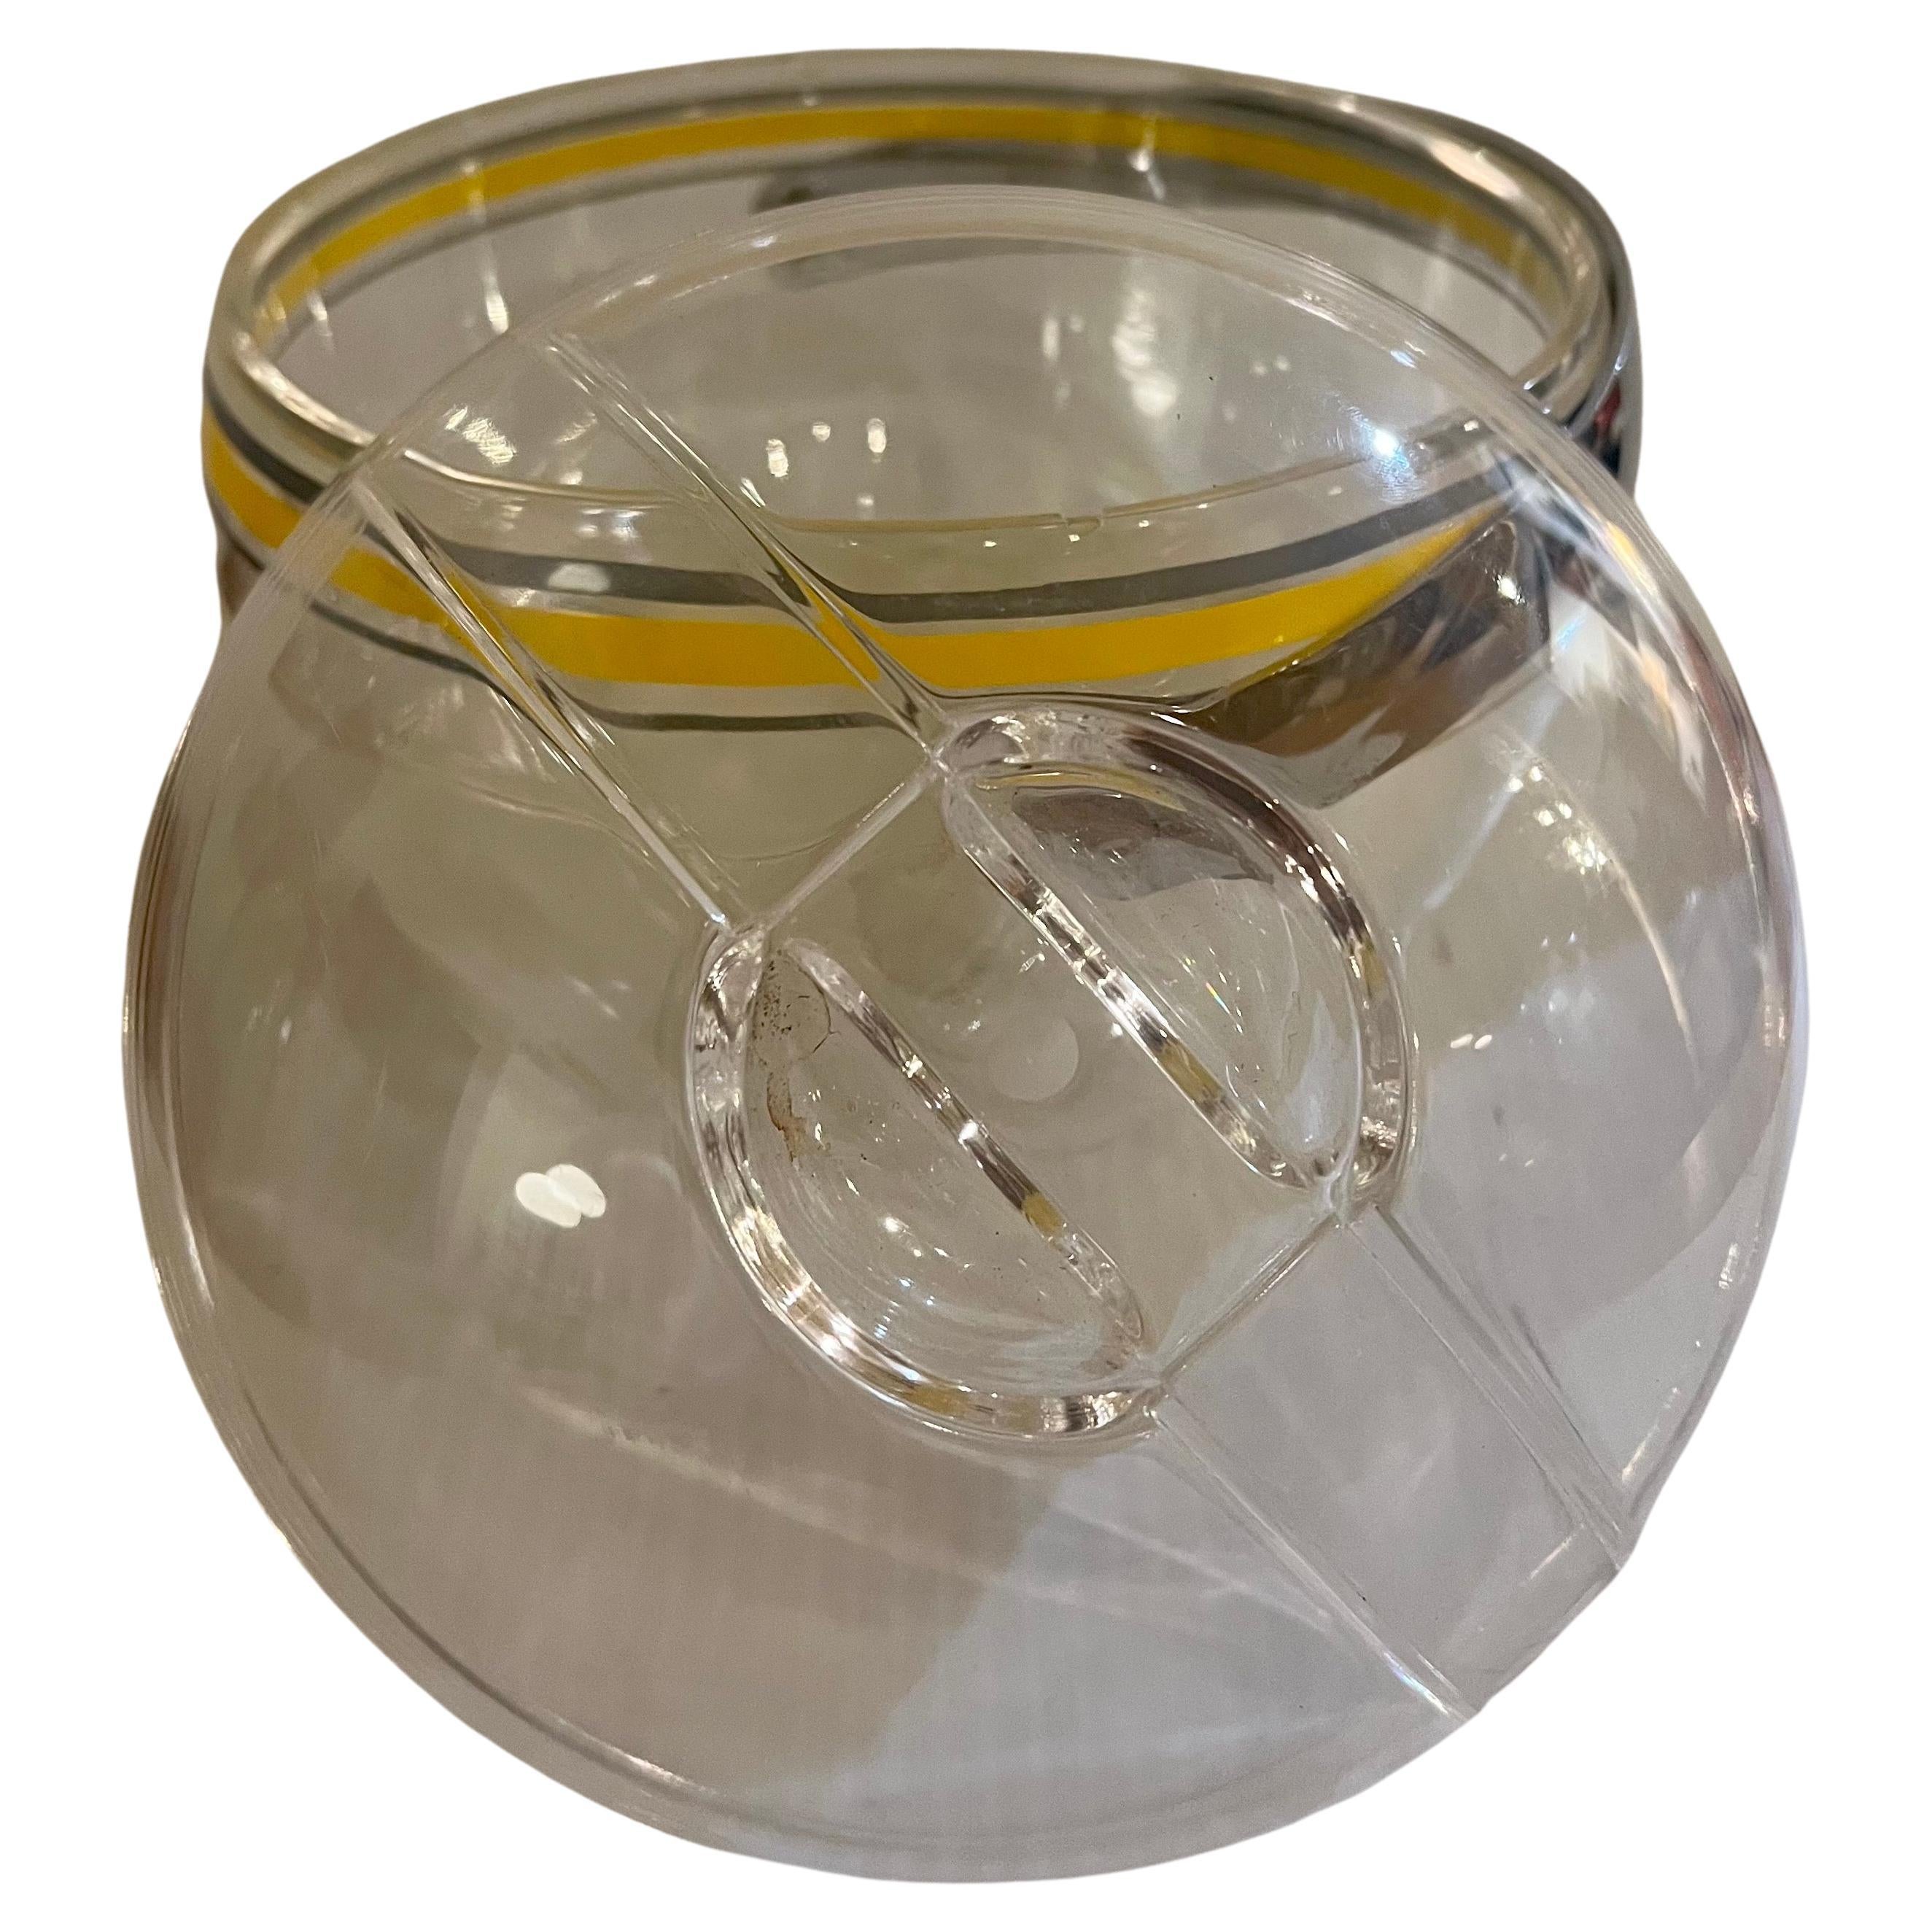 20th Century Iconic Space Age Lucite Ice Bucket Designed by Paolo Tilche for Guzzini Italy